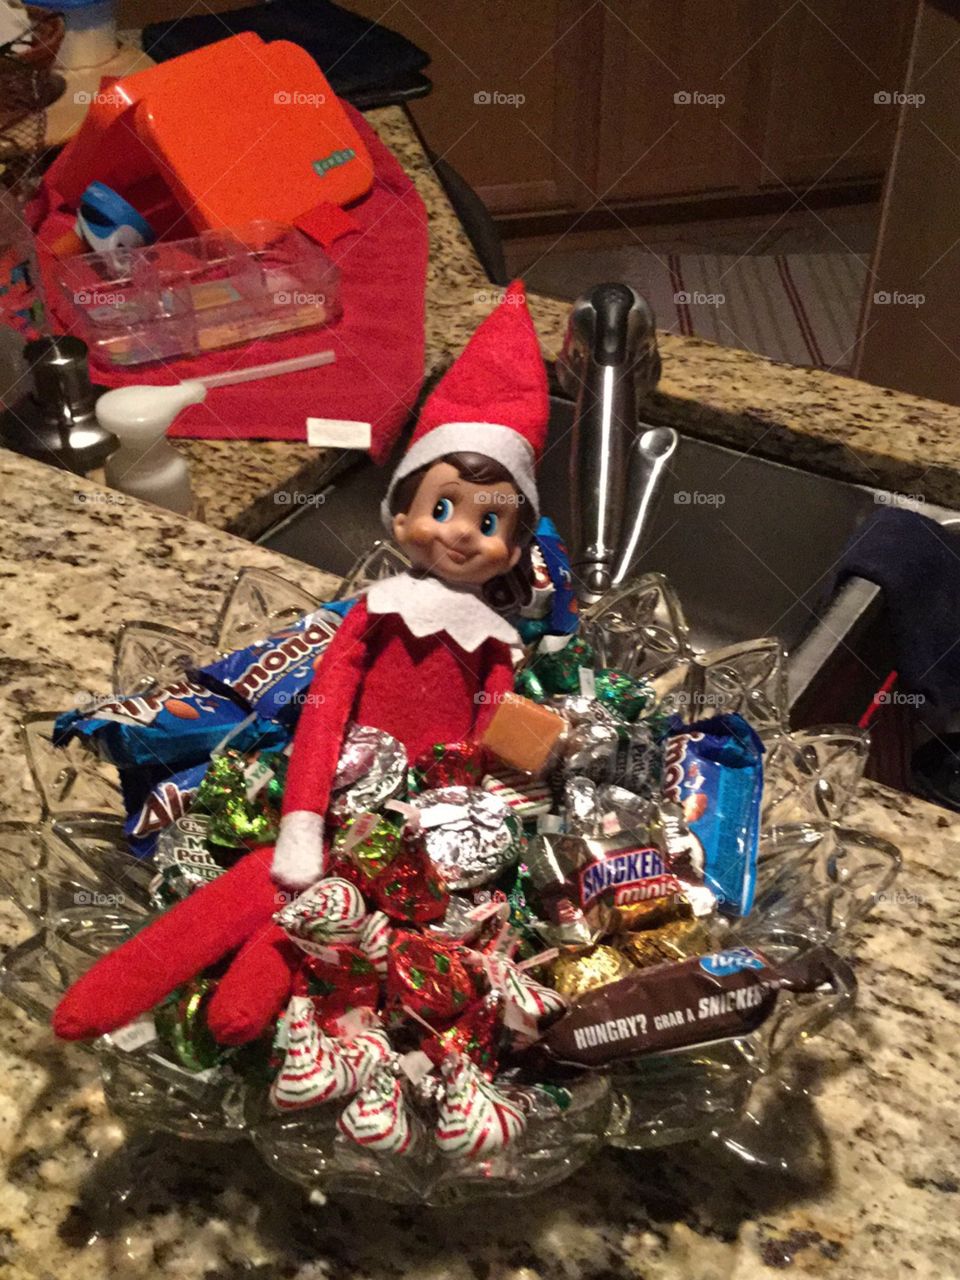 The Elf on the Shelf loves canday